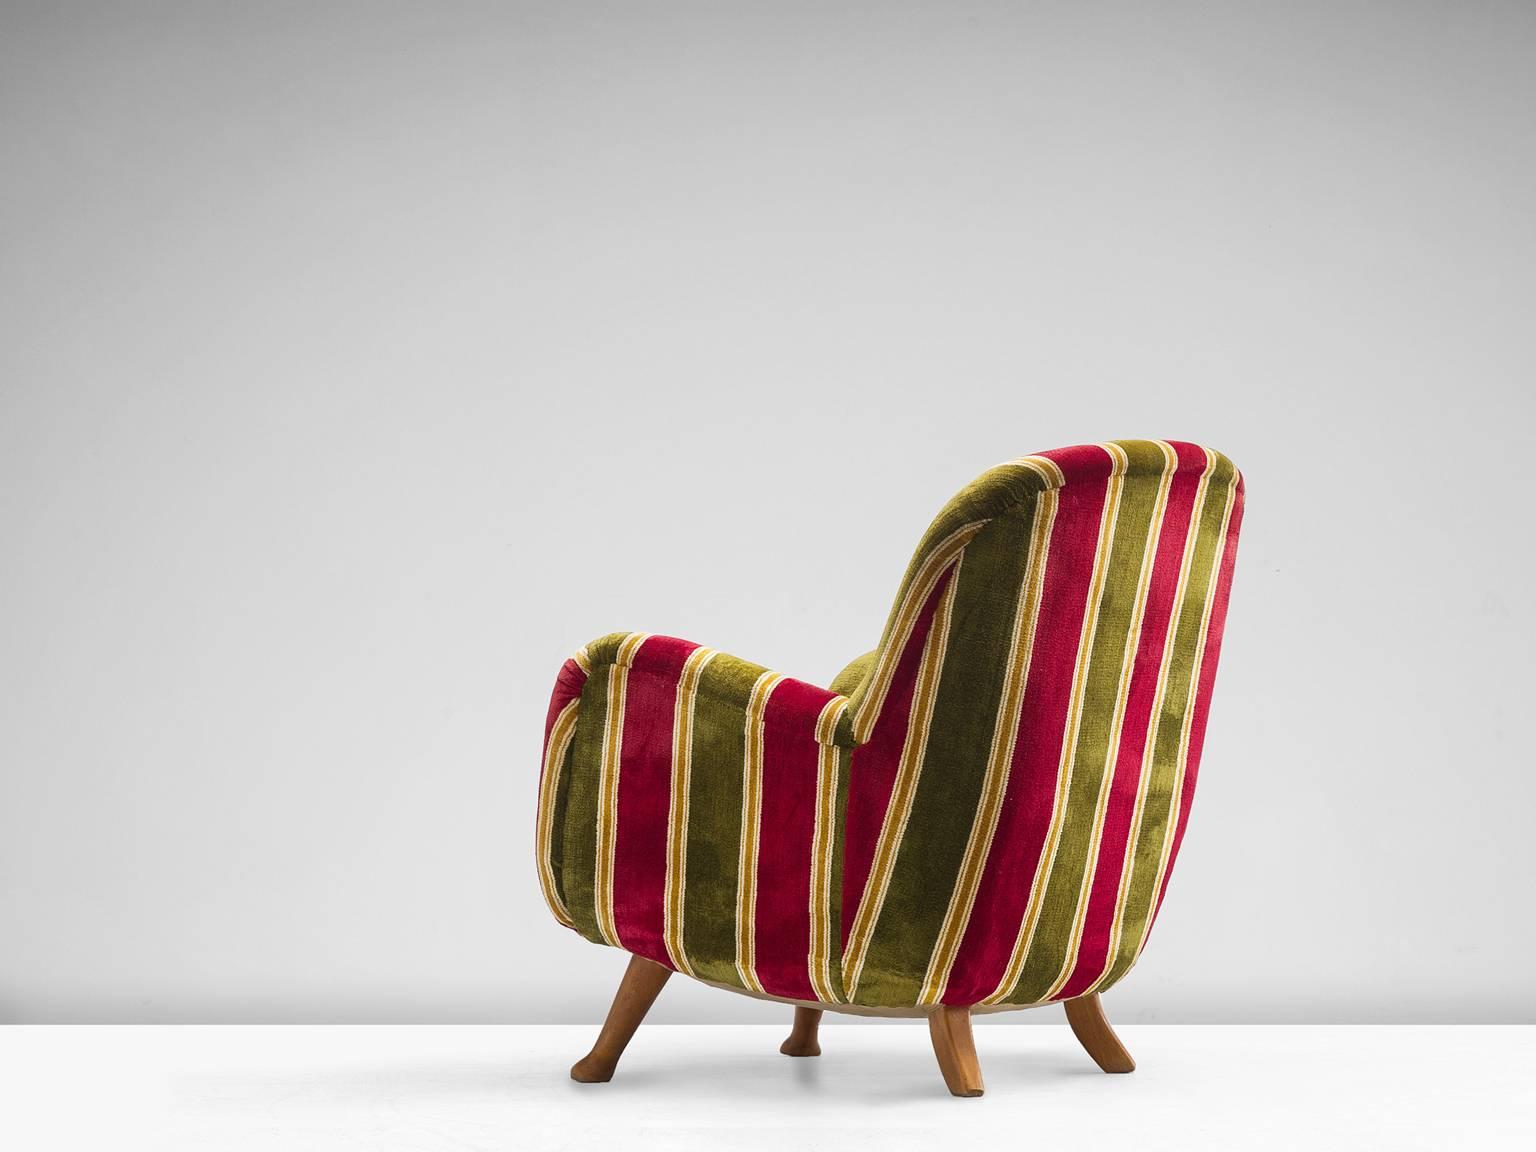 Armchair, green, red and ocre striped velvet and oak, Northen Europe, 1940s.

This colorful and curvy armchair is a very comfortable and strong singular item. The whole shell is slightly tilted backwards. The shell rests on four small oak legs that